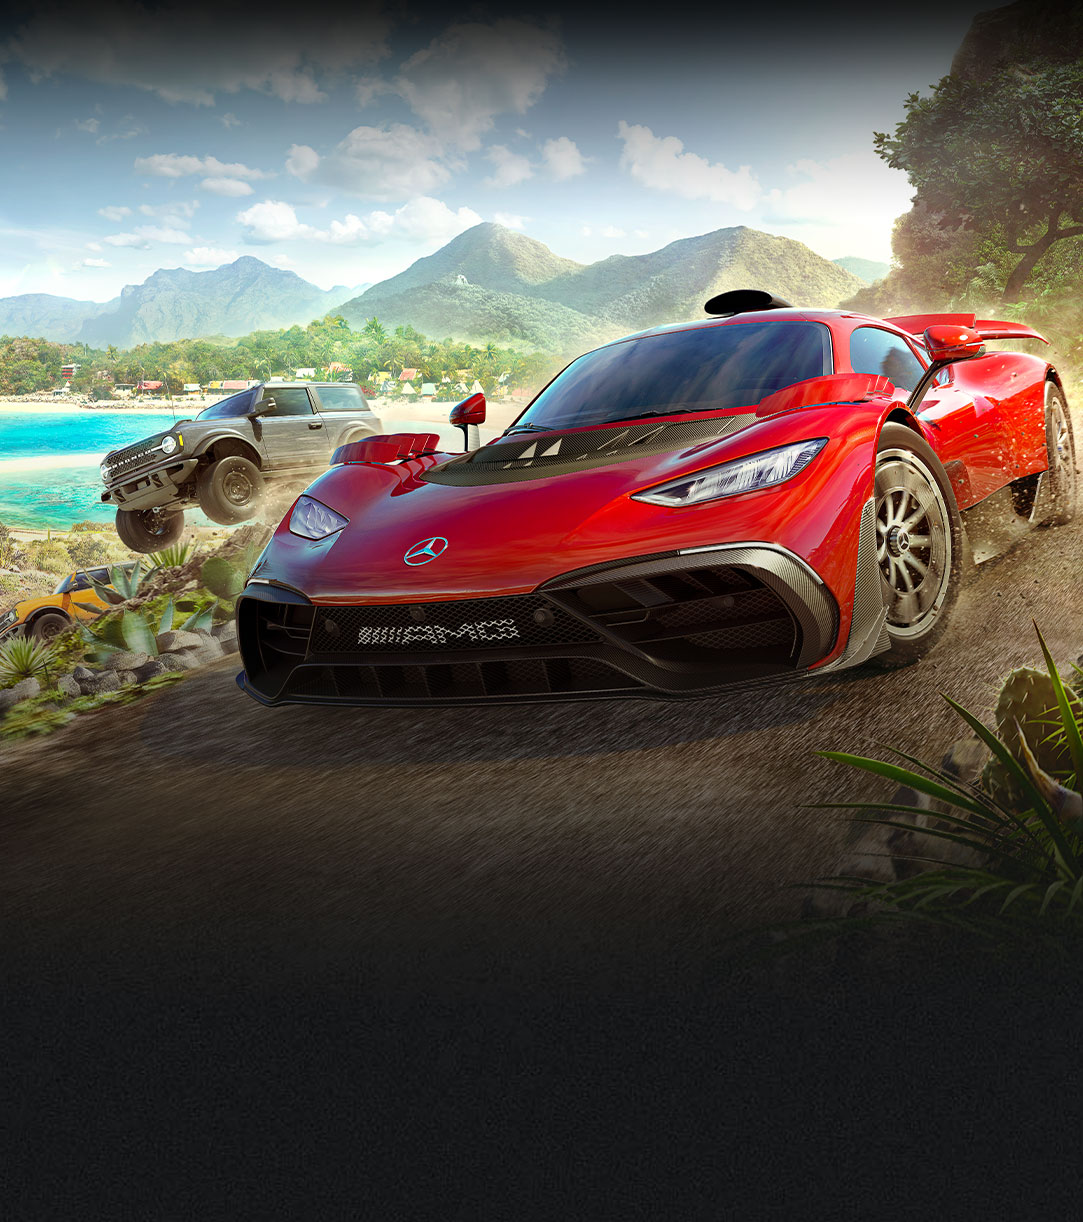 Cars from Forza Horizon 5 moving fast through a dirt track by water and many plants.